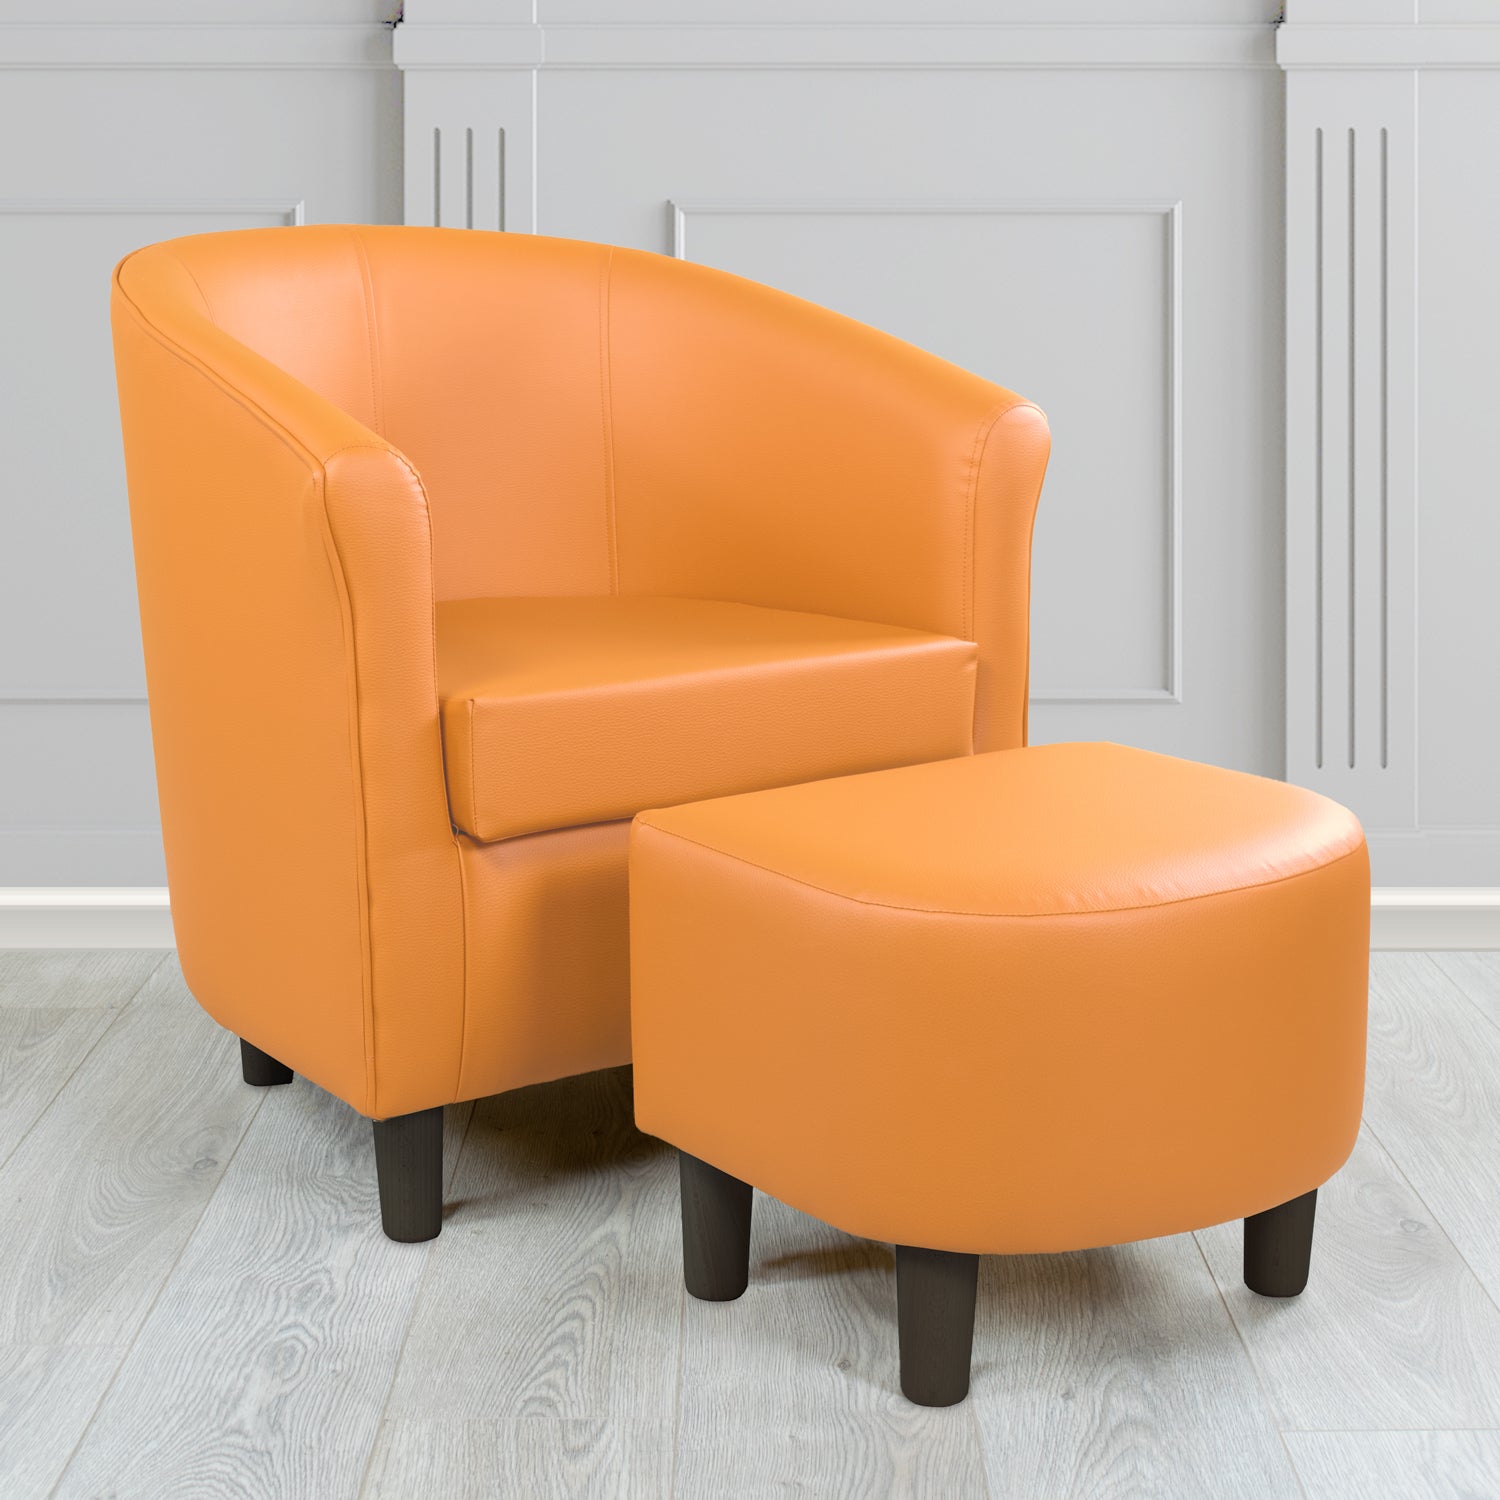 Tuscany Just Colour Tangerine Faux Leather Tub Chair with Footstool Set - The Tub Chair Shop